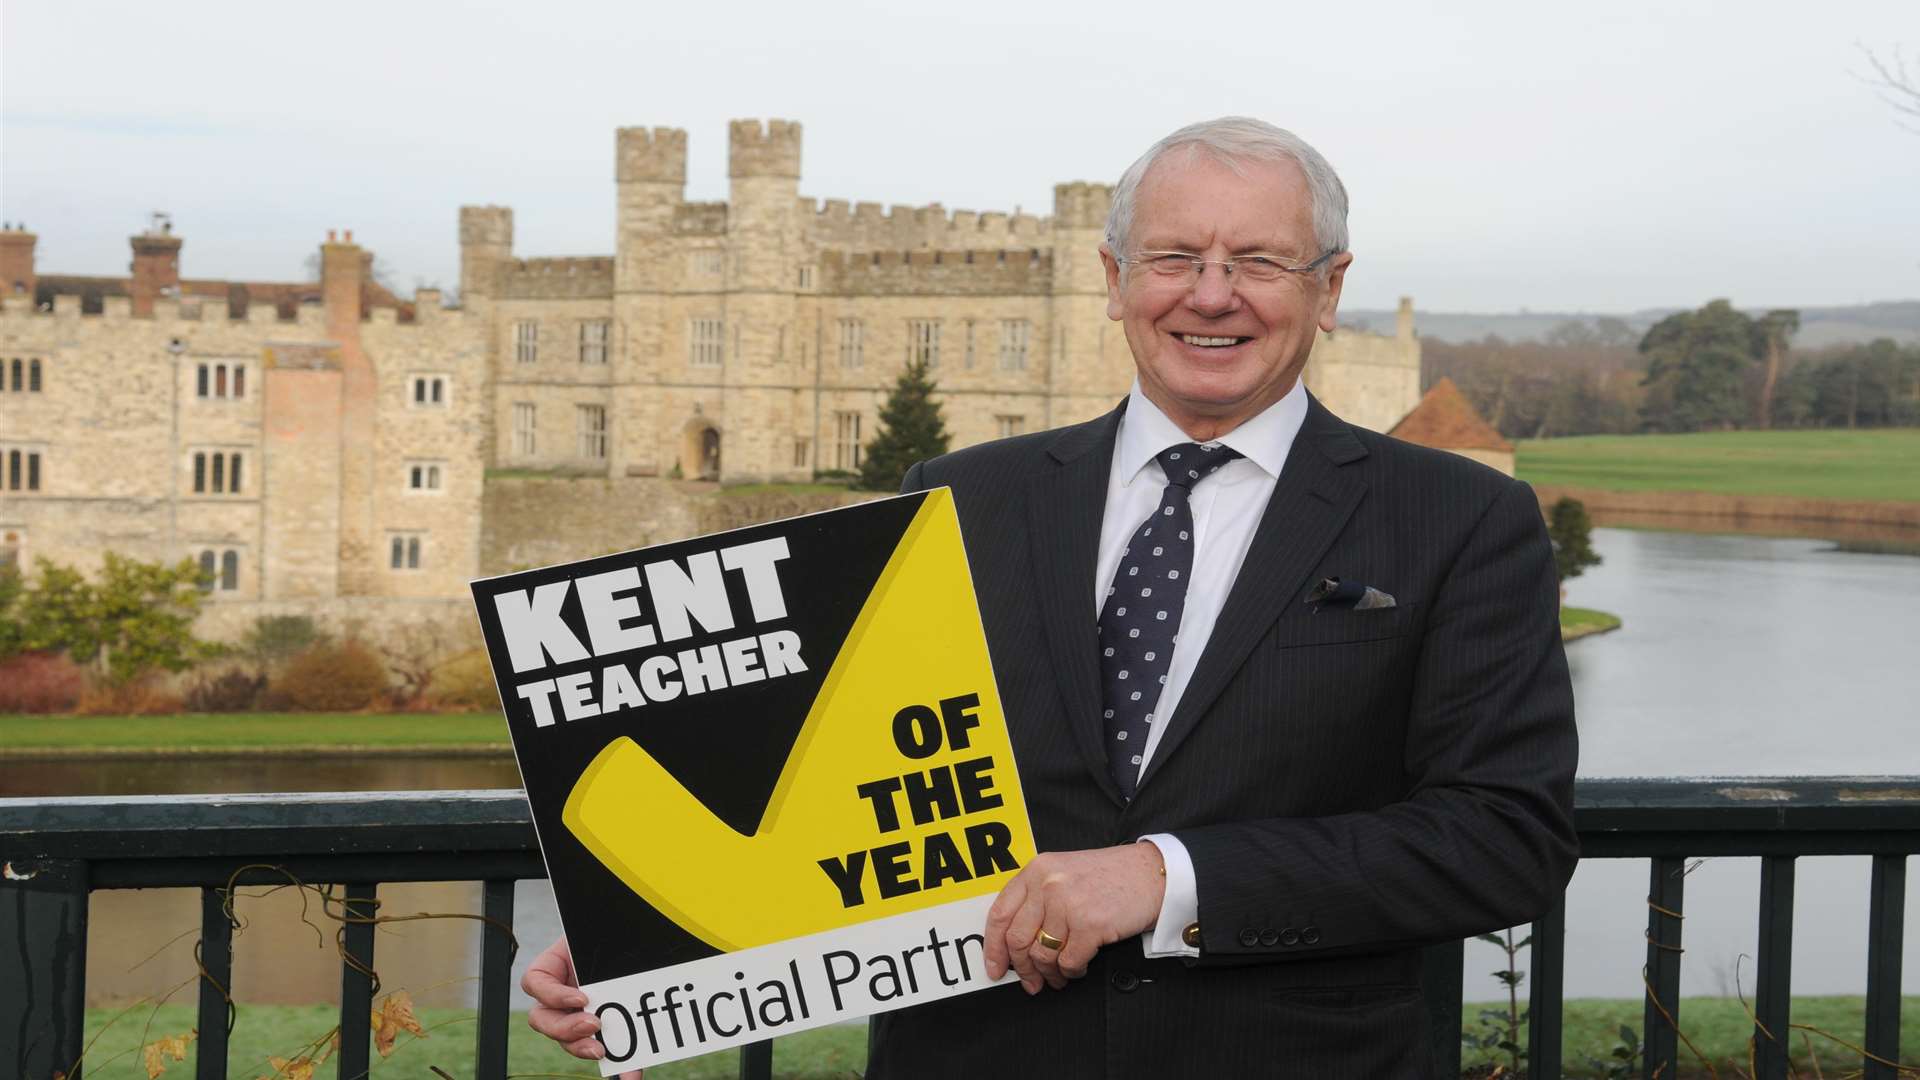 Cllr Mike O'Brien announces Medway Council's support of the early years and leadership team categories for the Kent Teacher of the Year Awards 2015